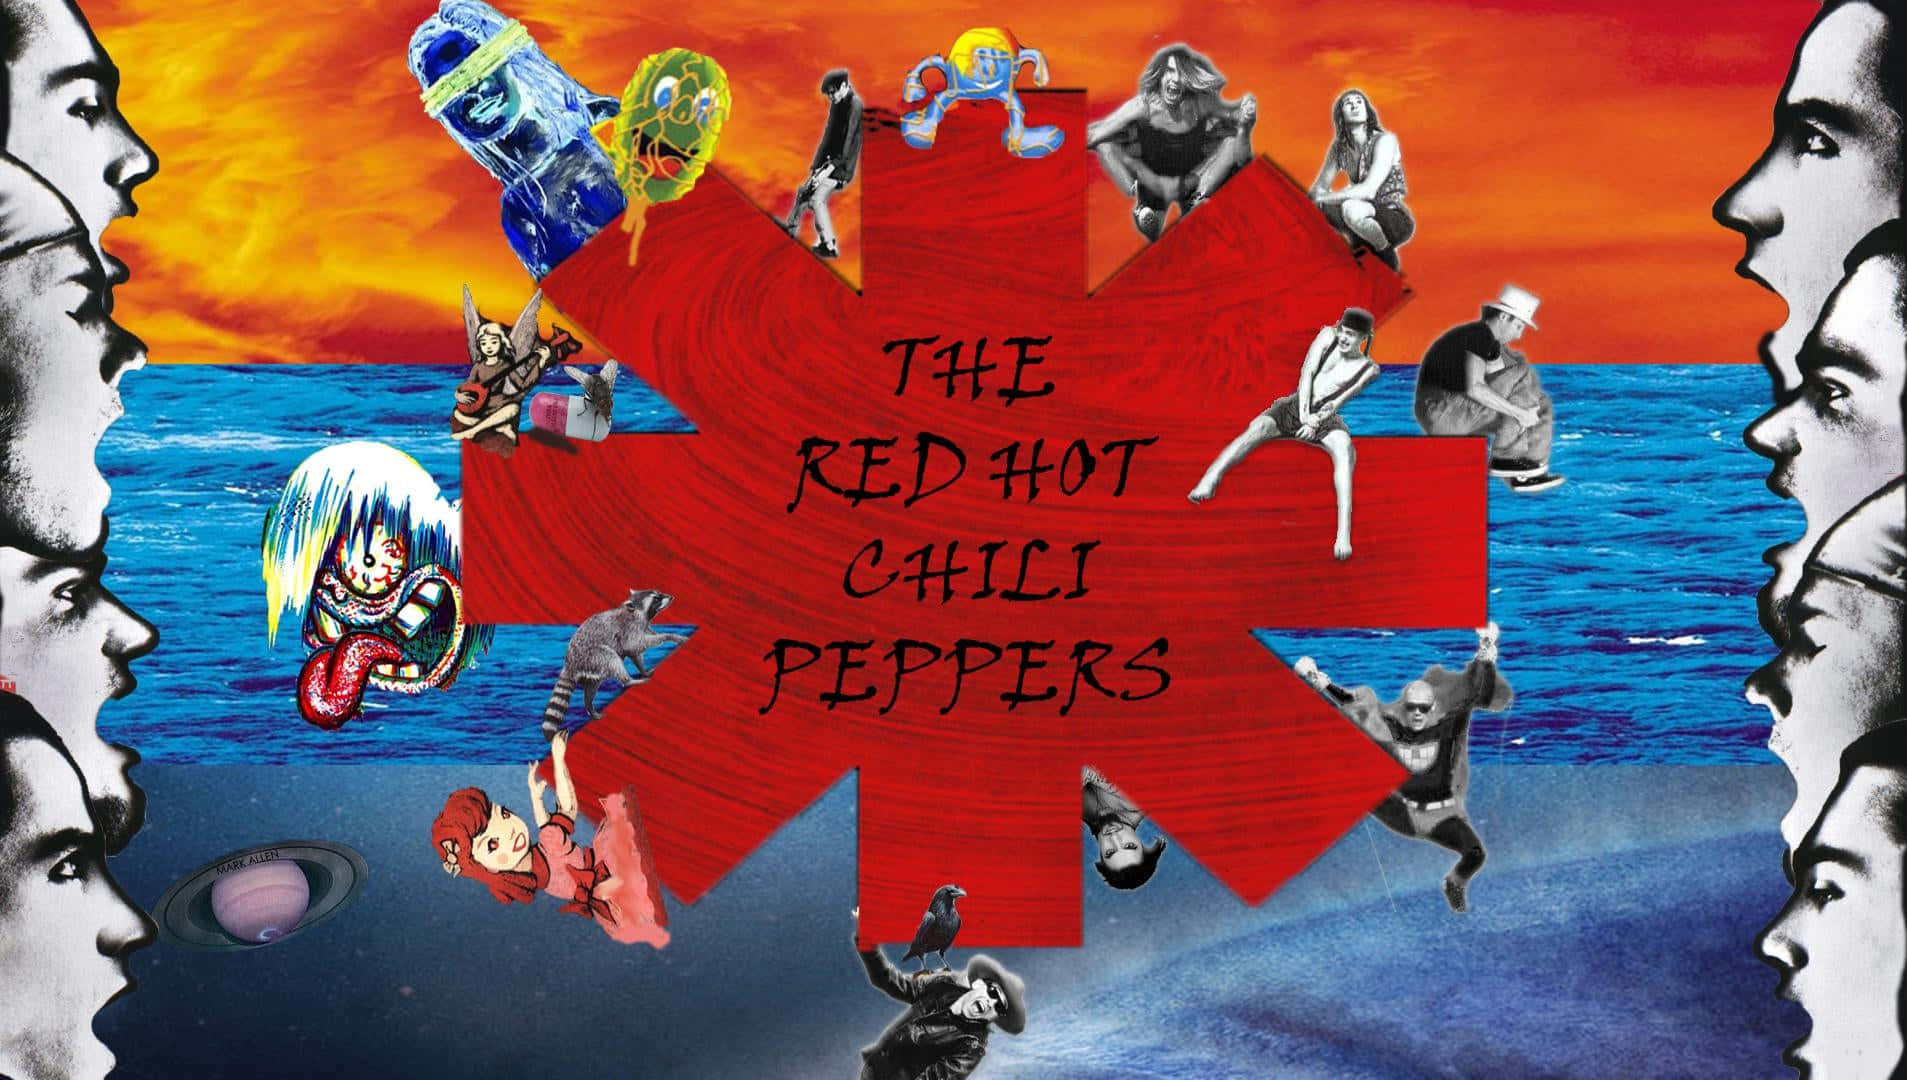 red hot chili peppers wallpaper logo  Red hot chili peppers poster Red  hot chili peppers band Red hot chili peppers album